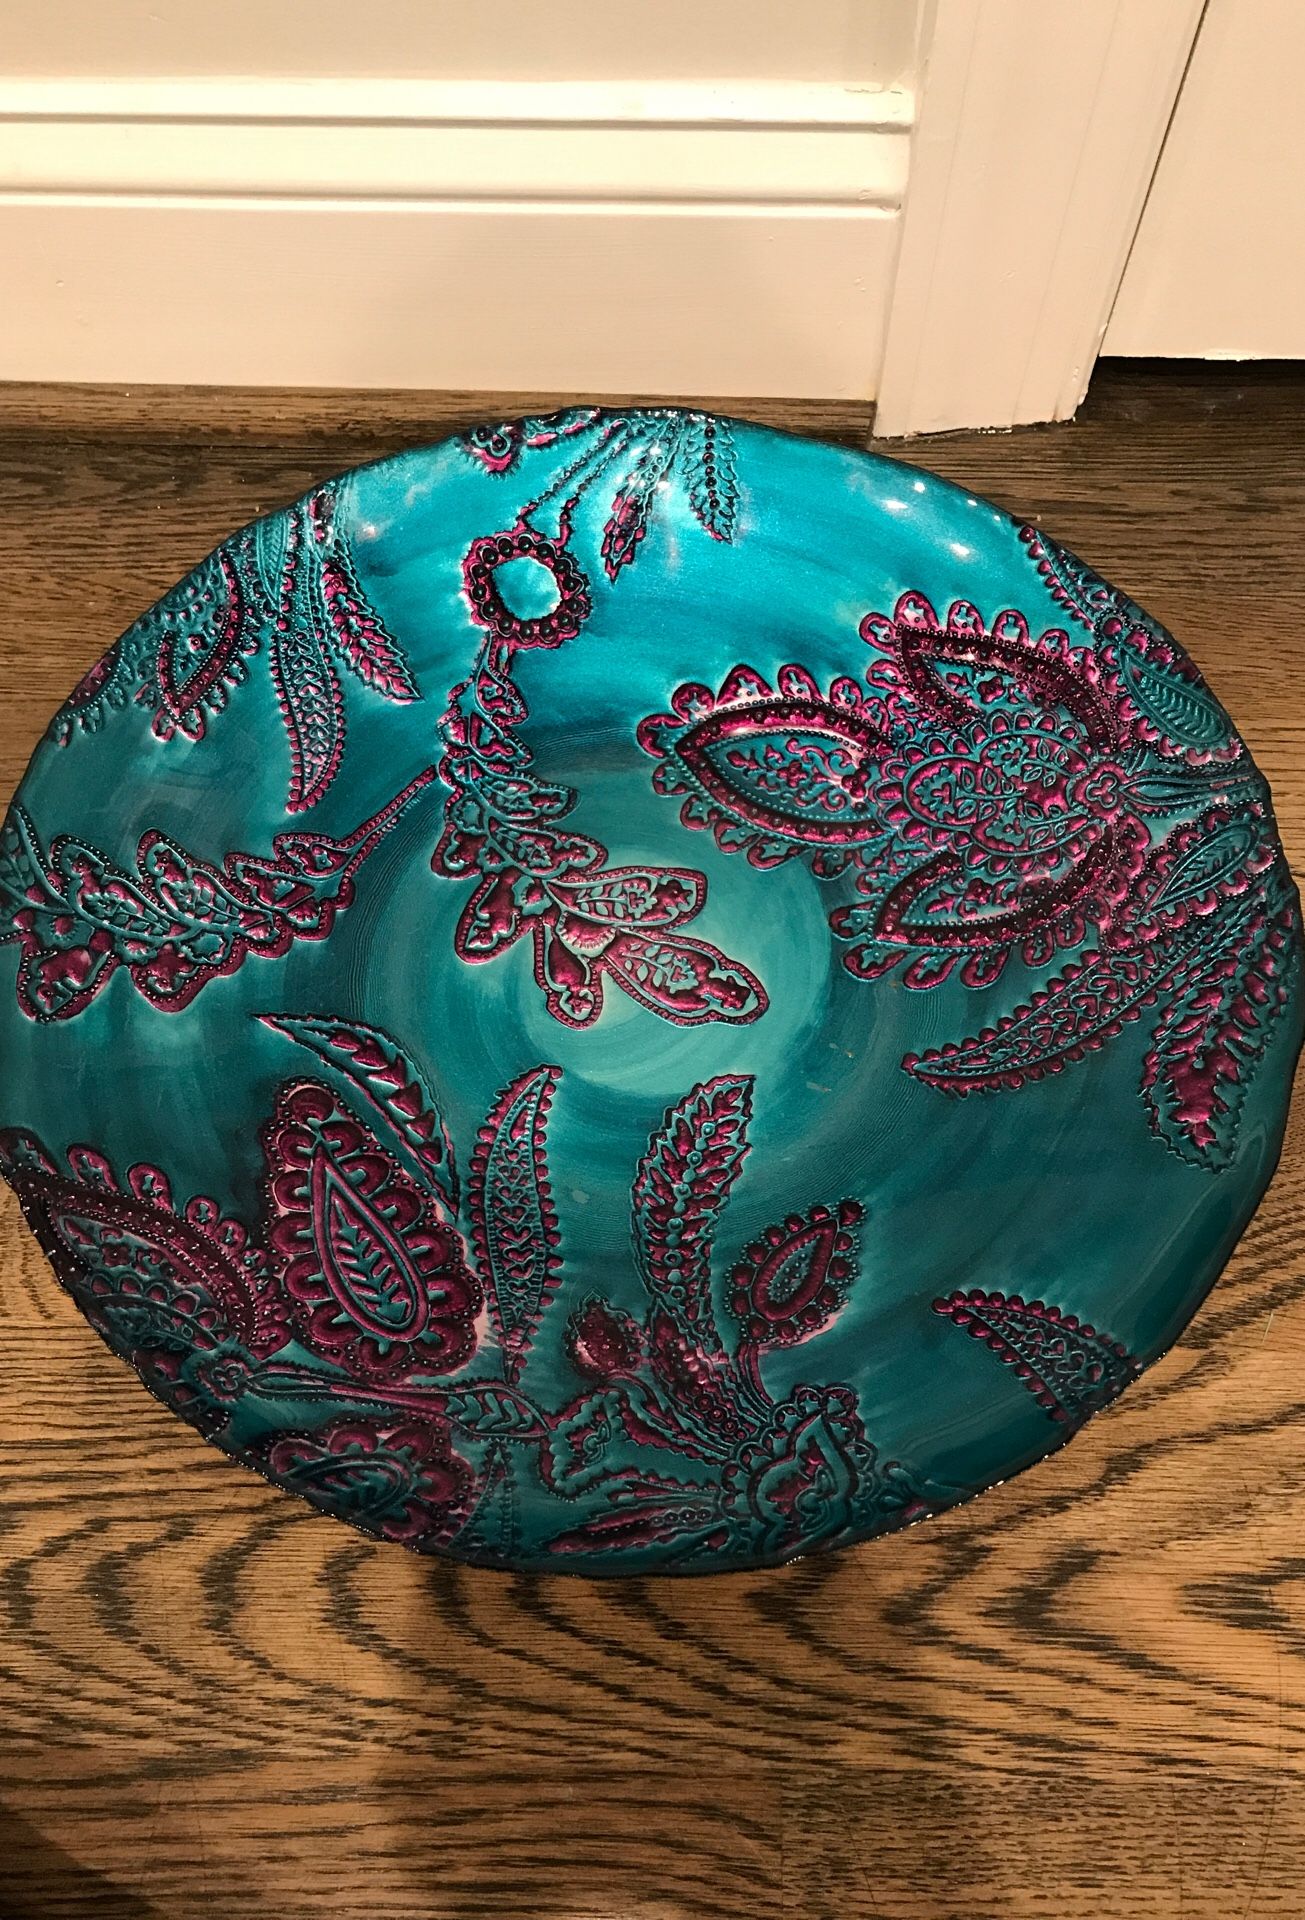 Blue and purple decor (leaf plate and big bowl)